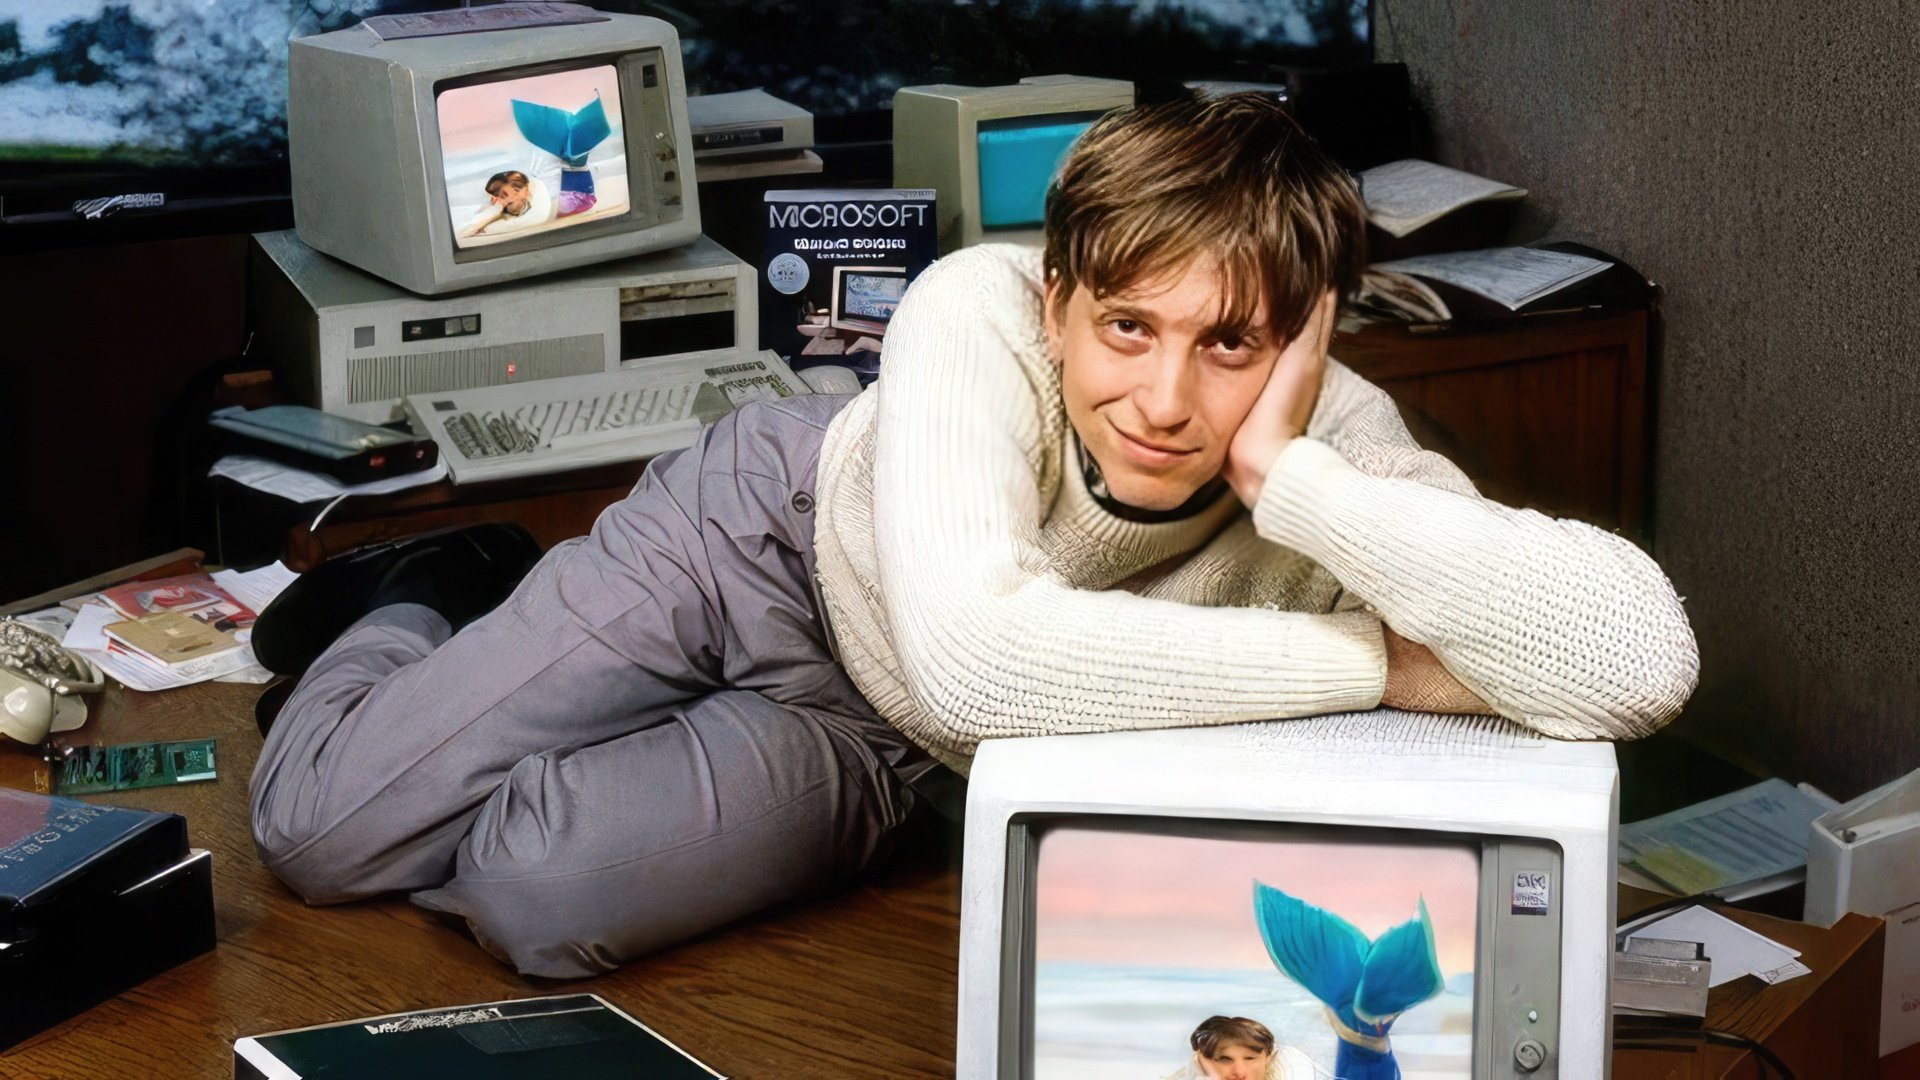 Bill Gates developed a passion for computers at just 12 years old